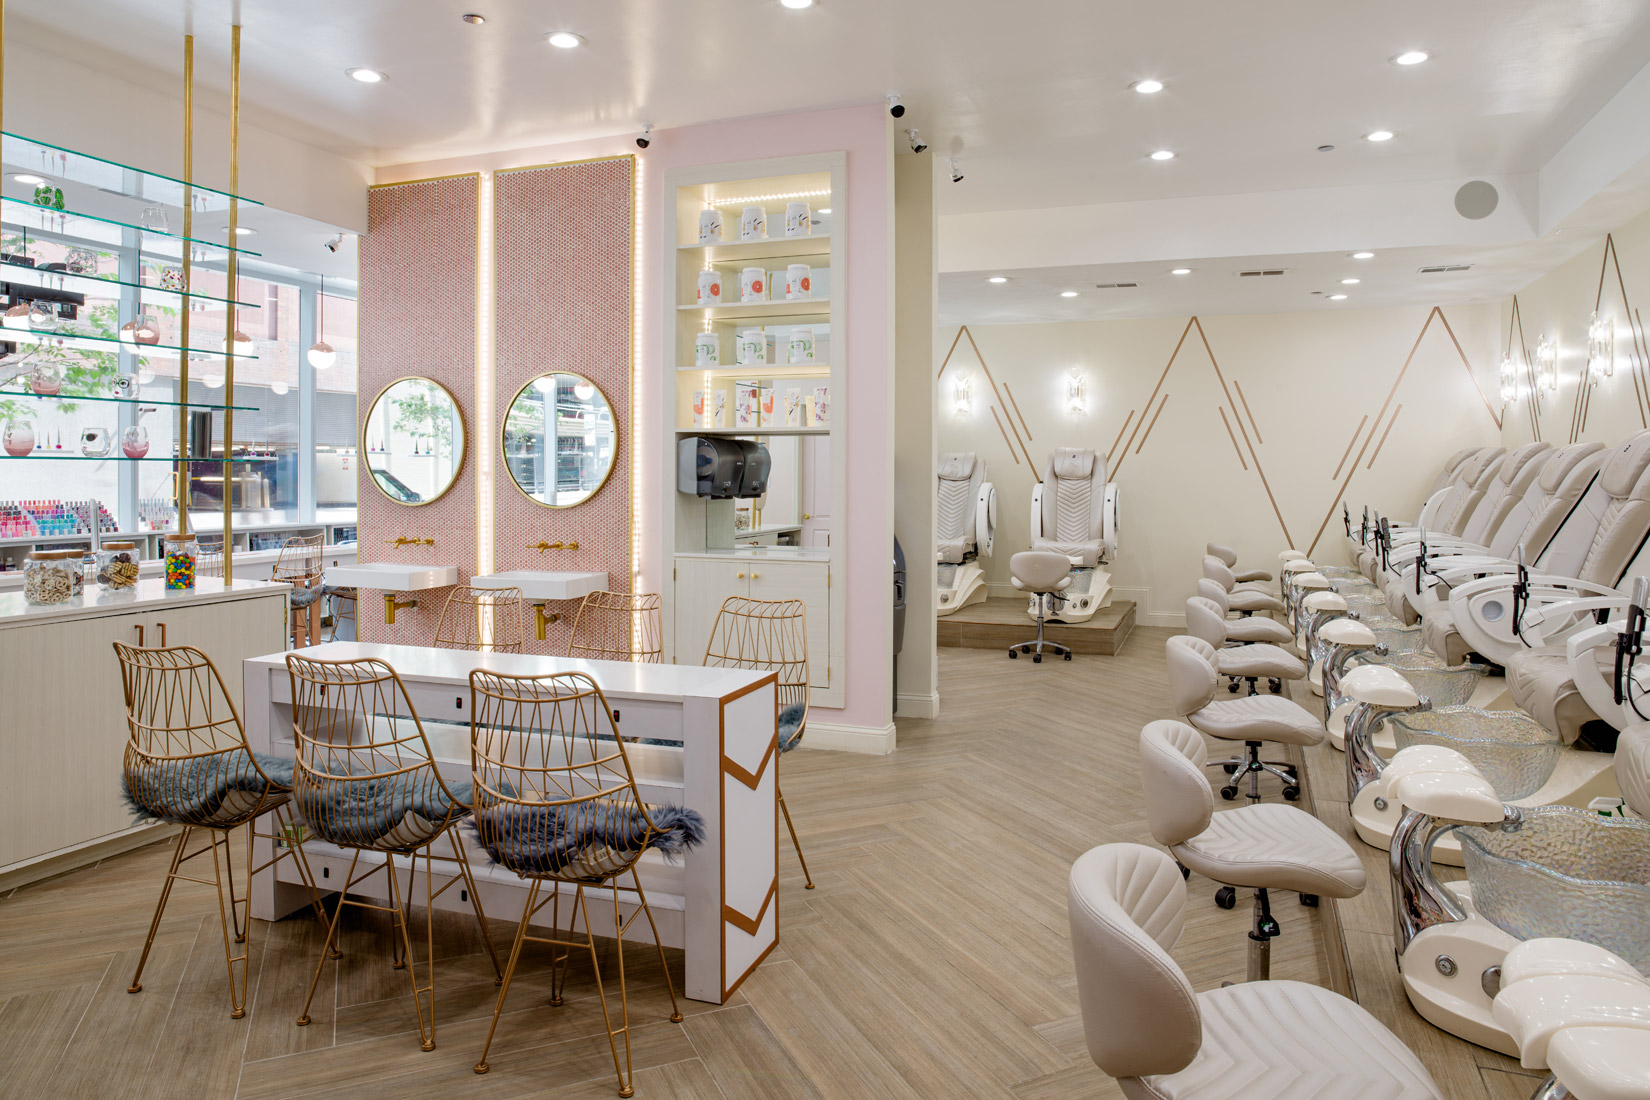 Nail Salon 60611 | Bedazzled Nails & Spa of Chicago, Illinois | Gel